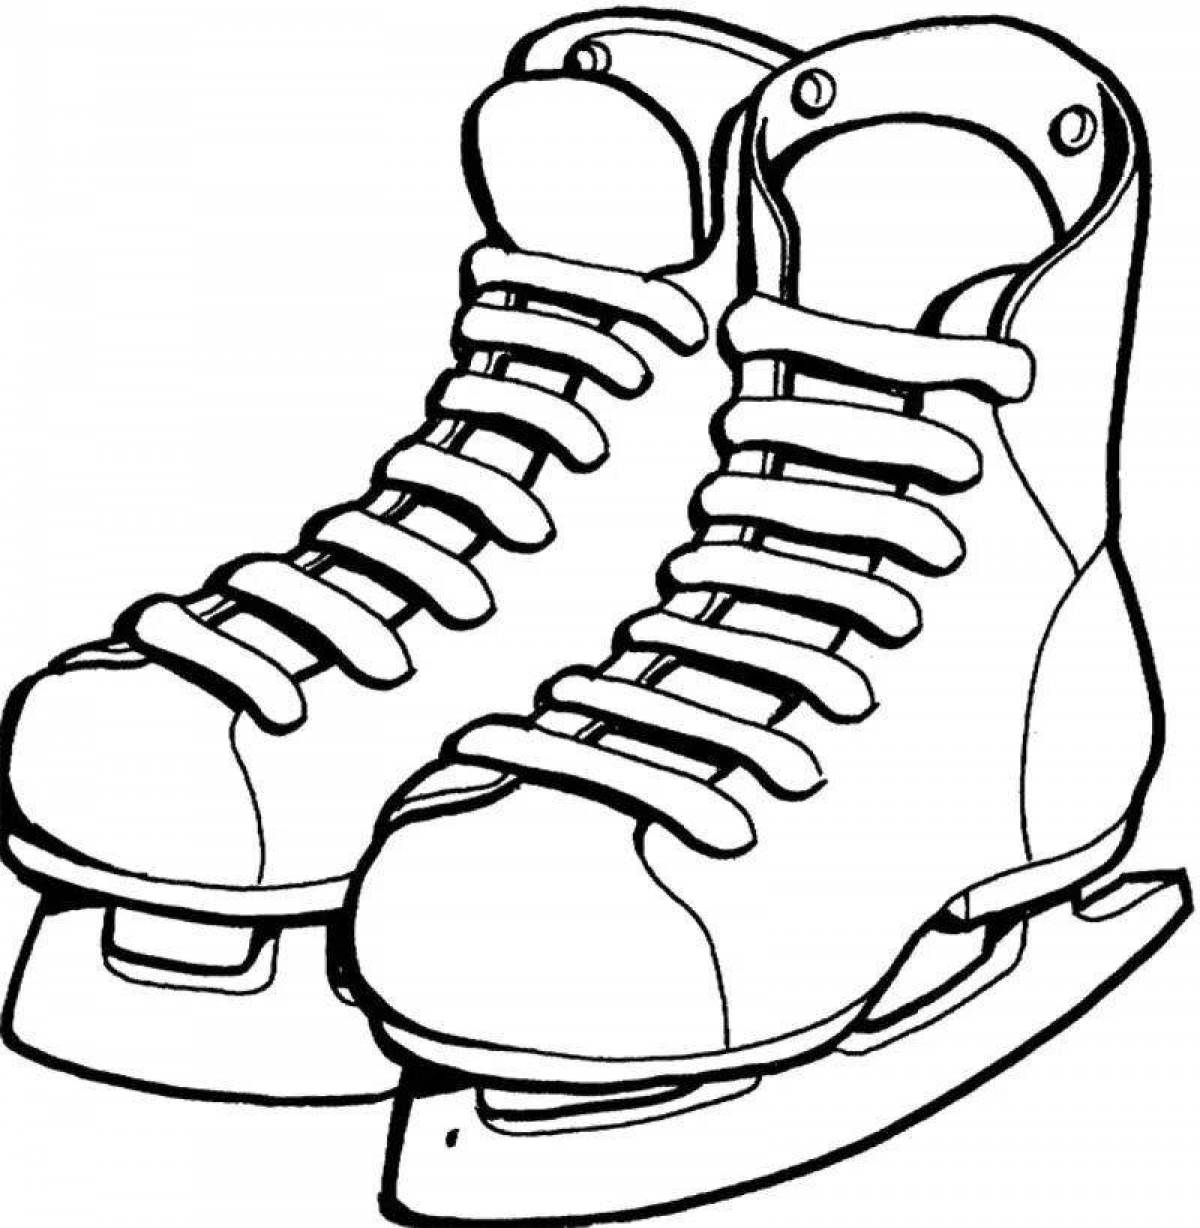 Coloring page cool winter shoes